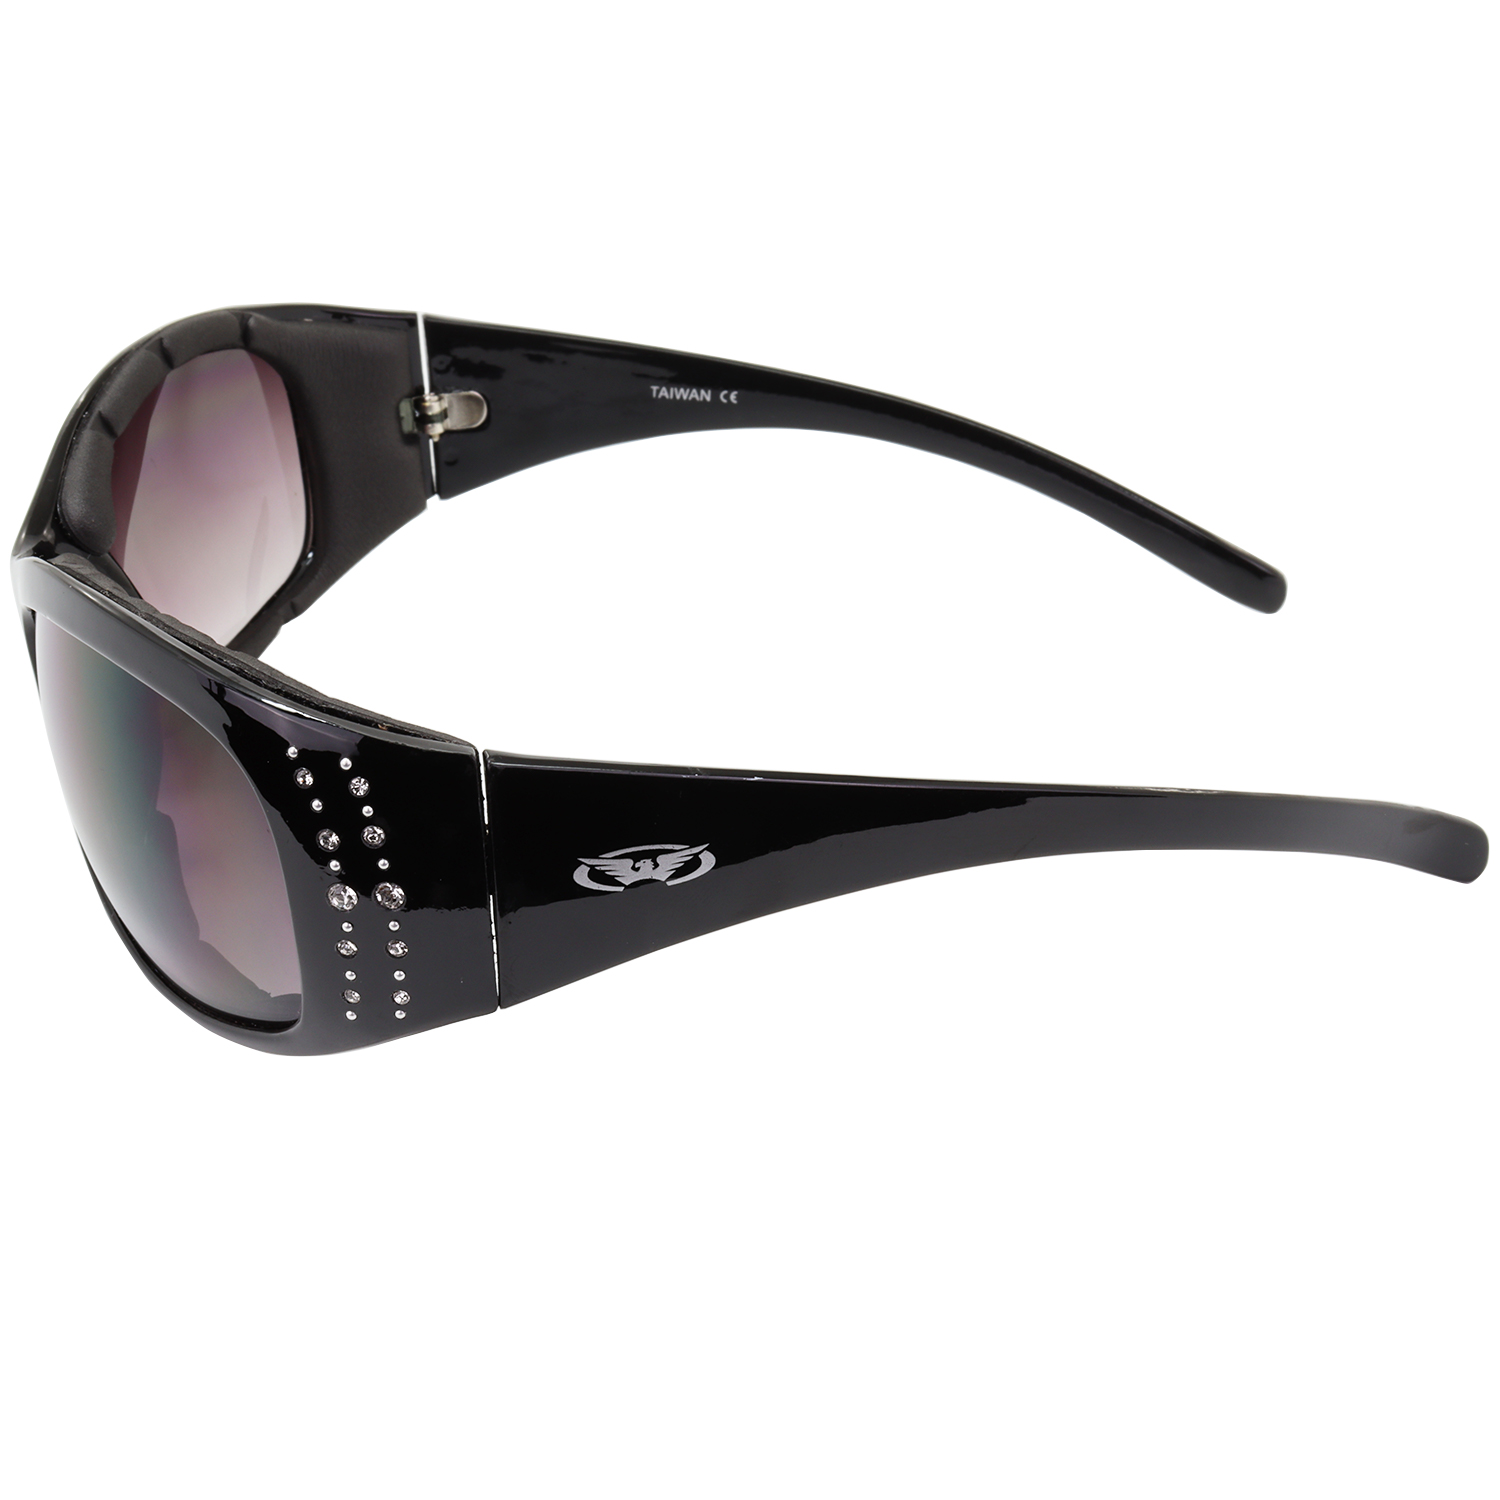 Global Vision Marilyn-2 Plus Motorcycle Riding Glasses for Women Sunglasses Black Padded Frames - image 5 of 7